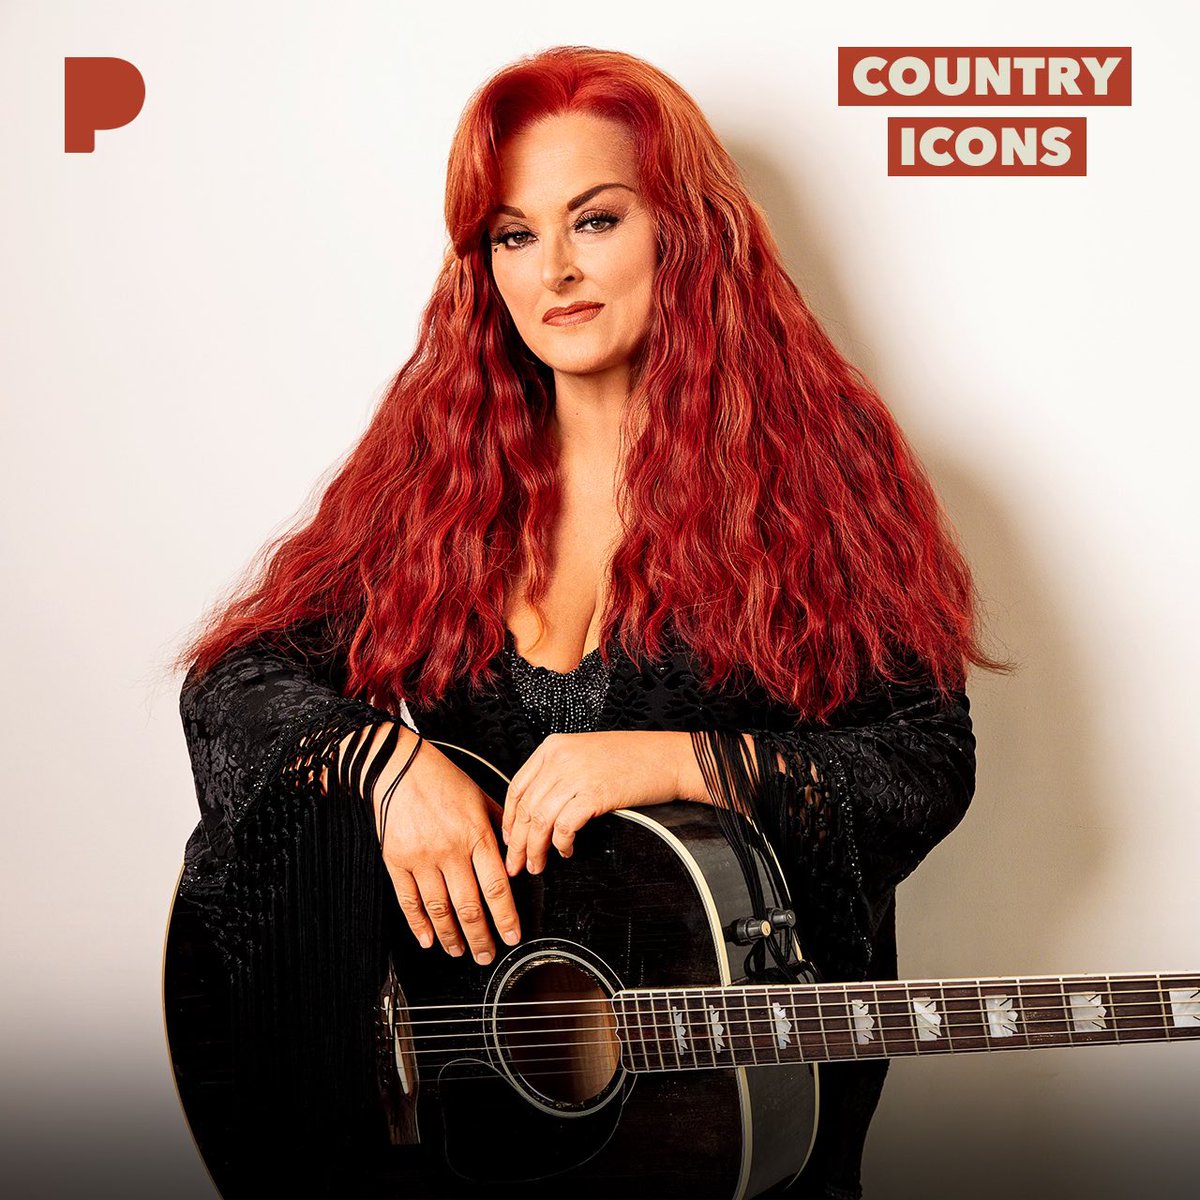 The BACK TO WY Tour may be over, but we’re still not over it. Listen to “Tell Me Why” on @pandoramusic’s Country Icons playlist now!